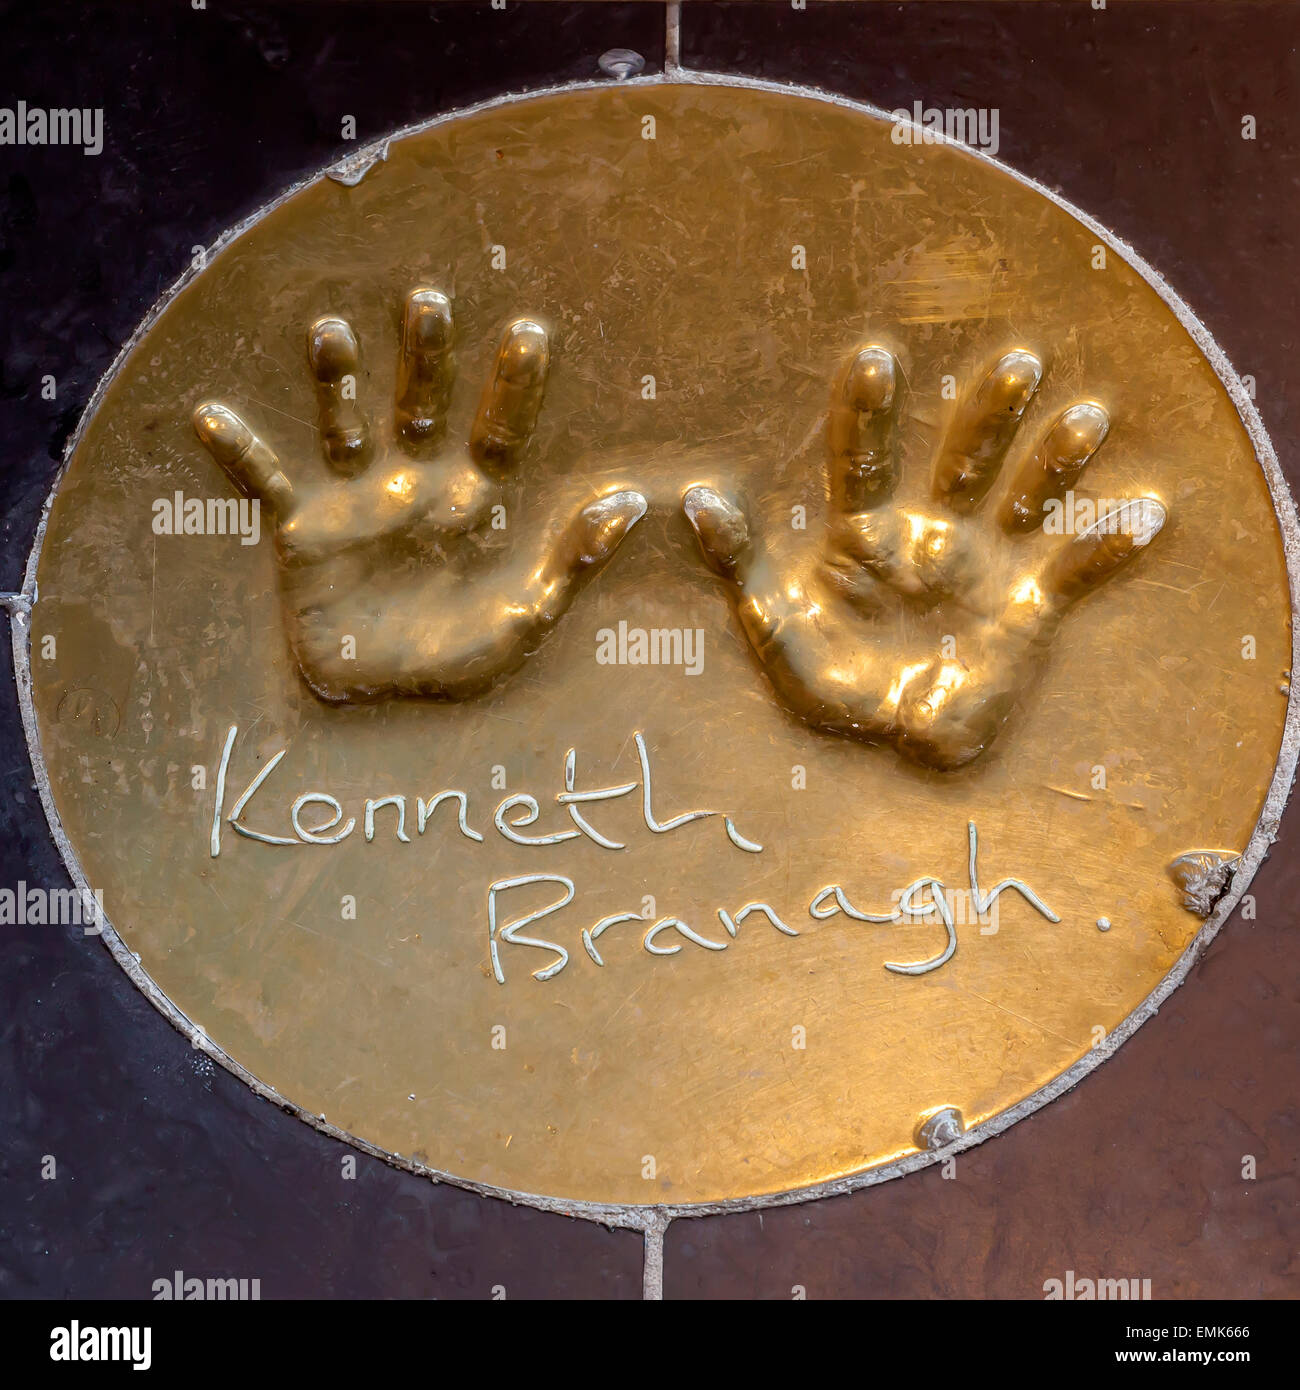 Handprints of British actor Kenneth Branagh on the floor in front of a London cinema, London, England, United Kingdom Stock Photo